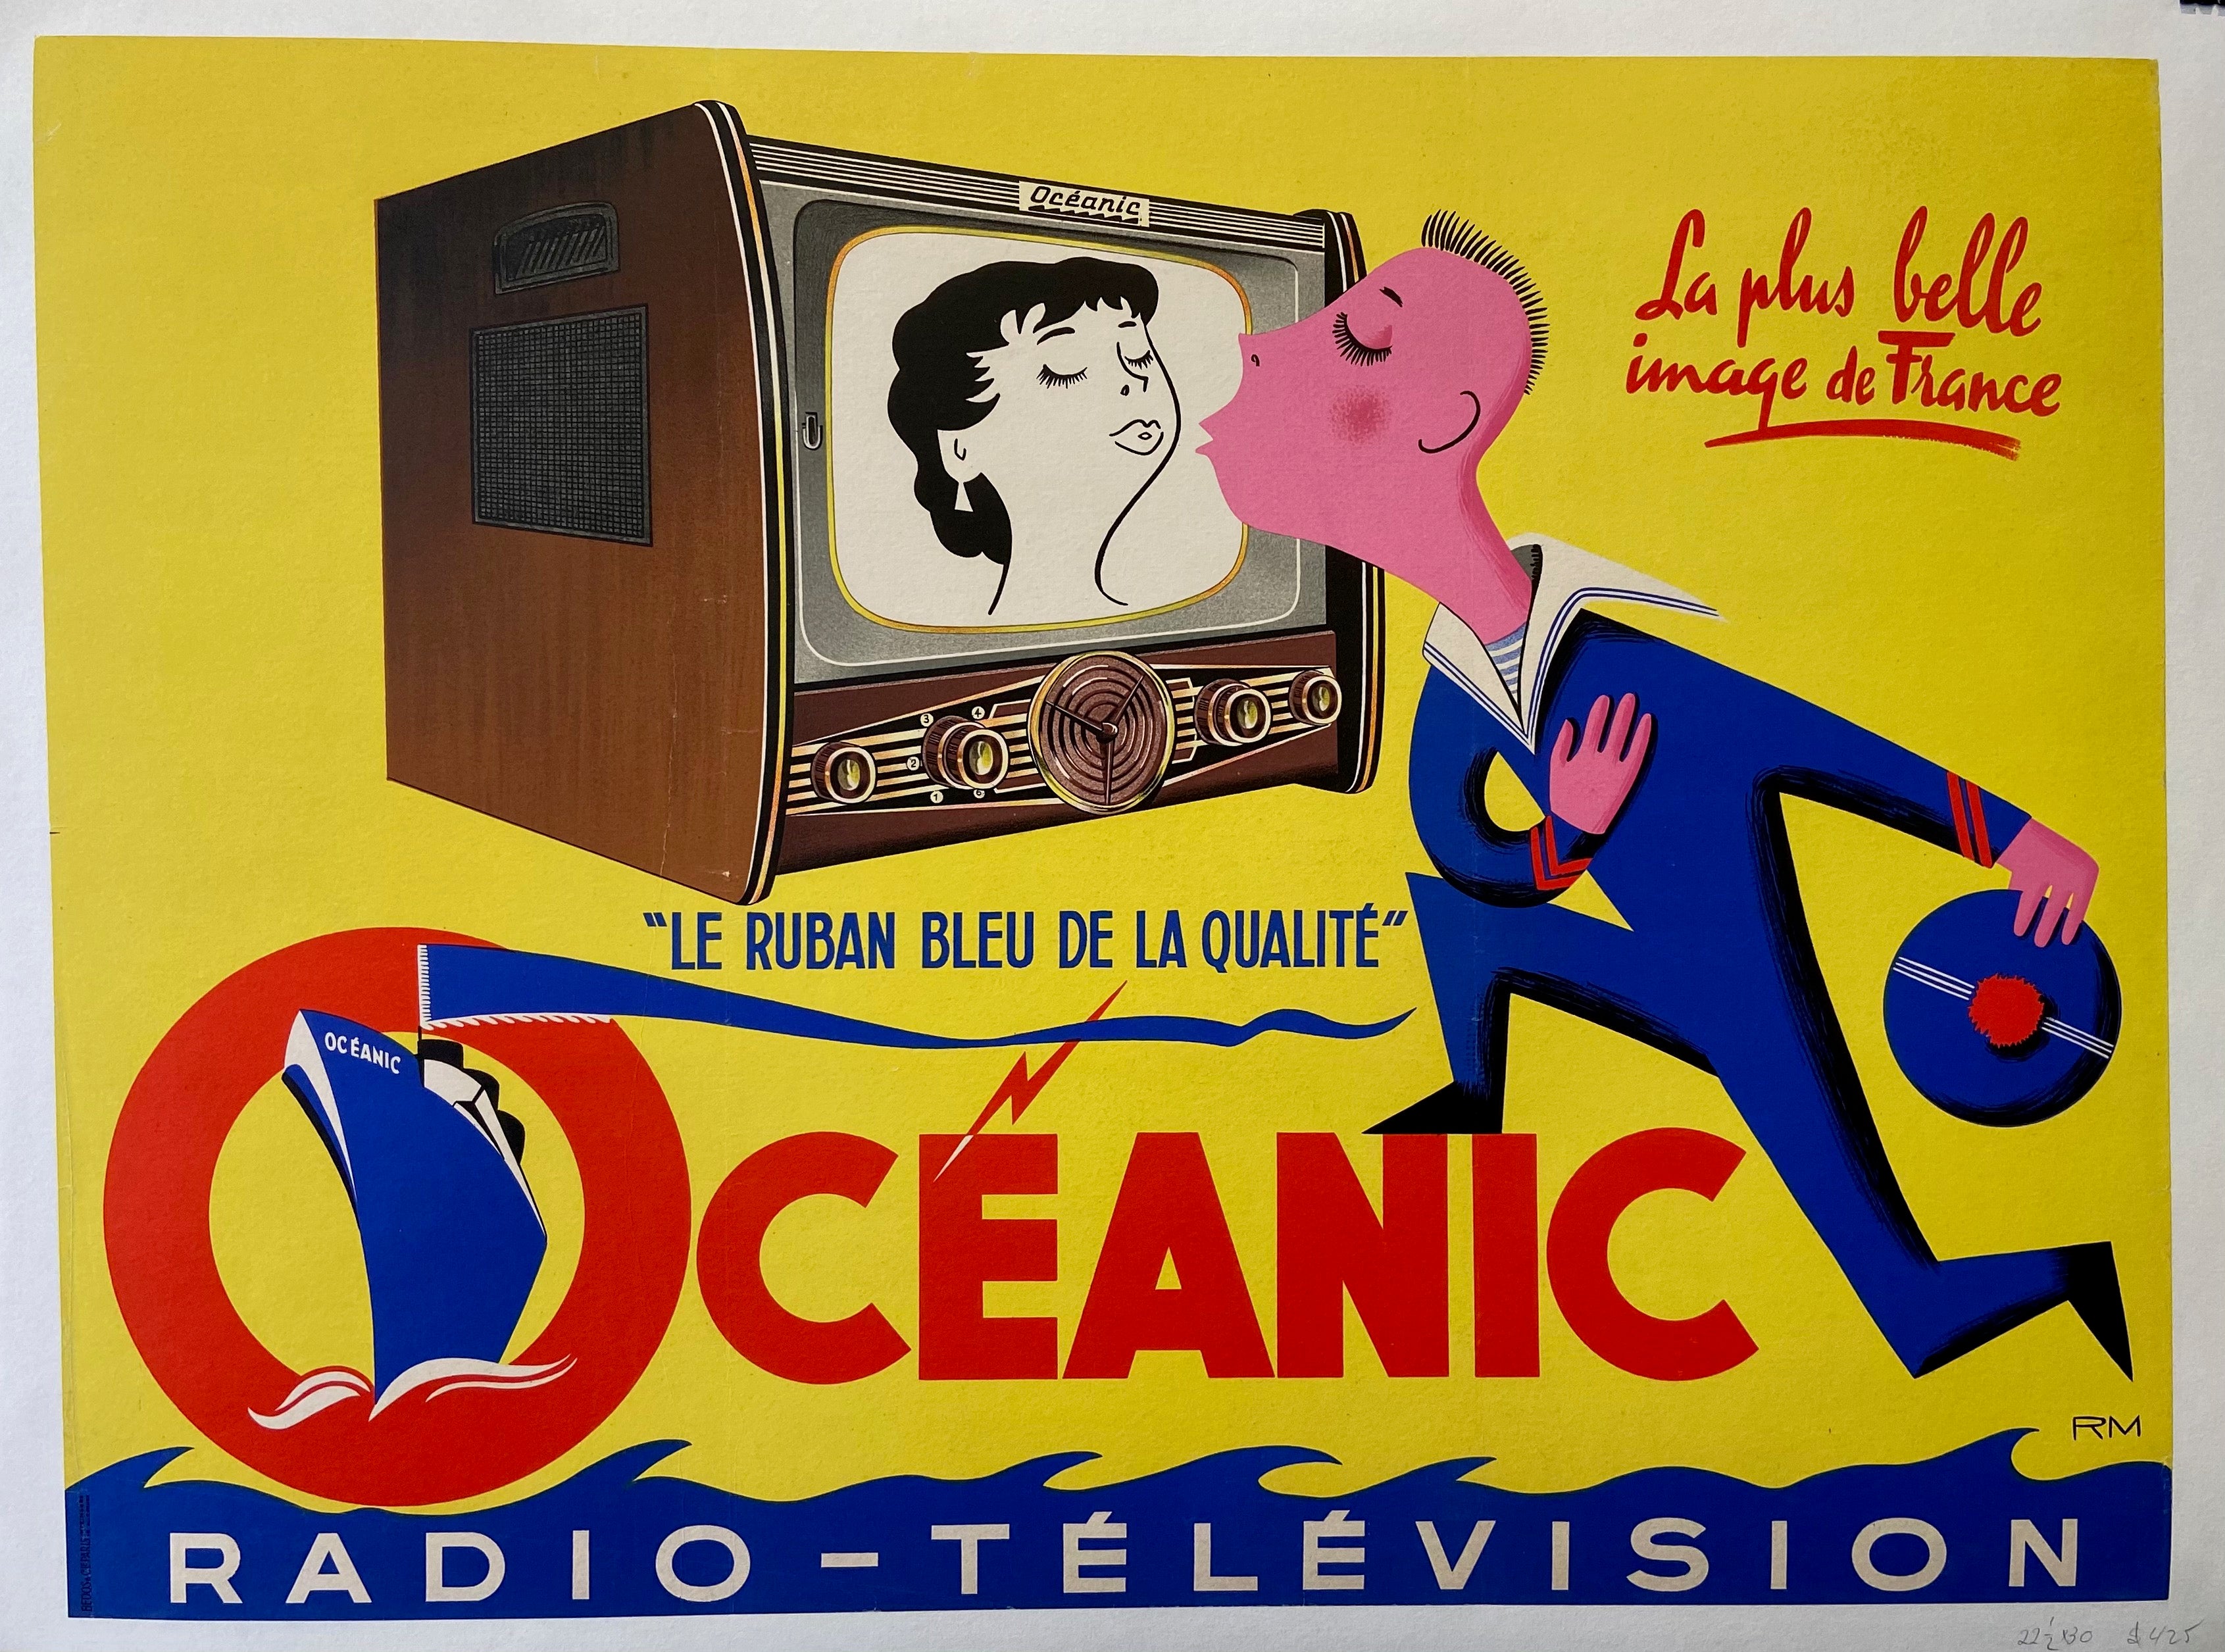 Poster showing a pink cartoon man kissing a woman on television